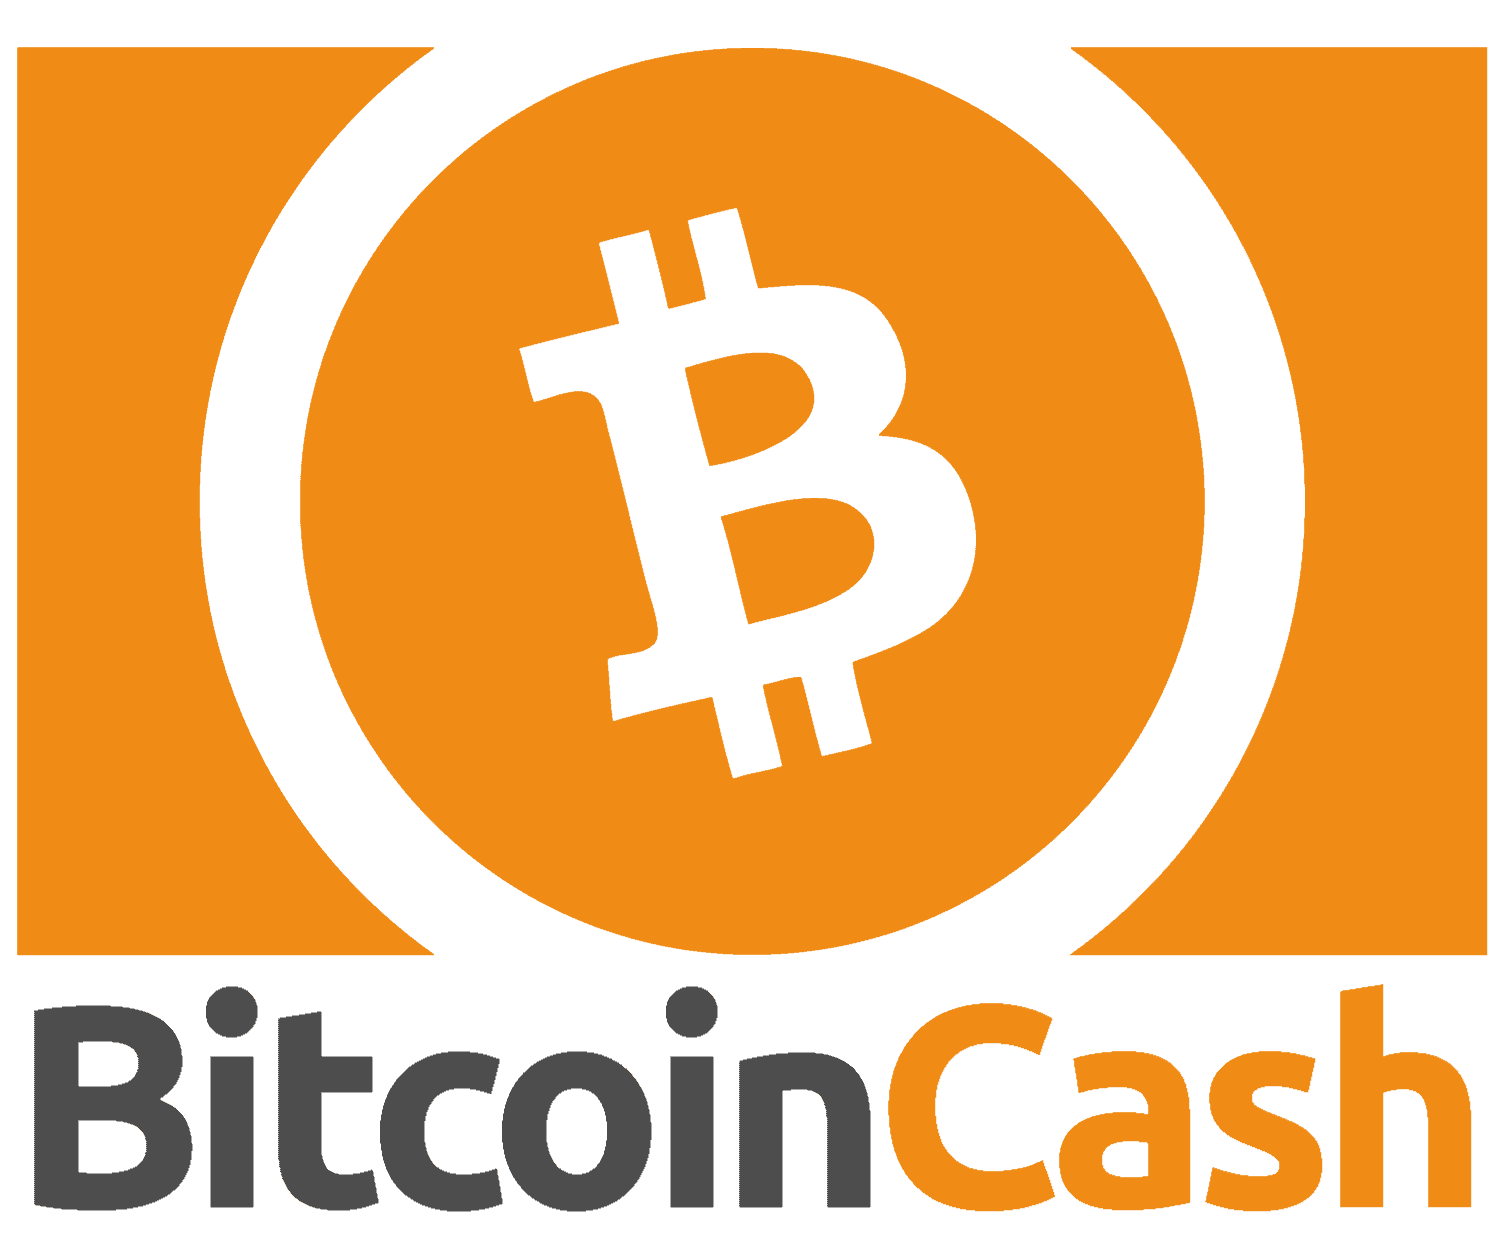 How To Buy And Invest In Bitcoin Cash Bch In 2019 Insidebitcoins Com - 